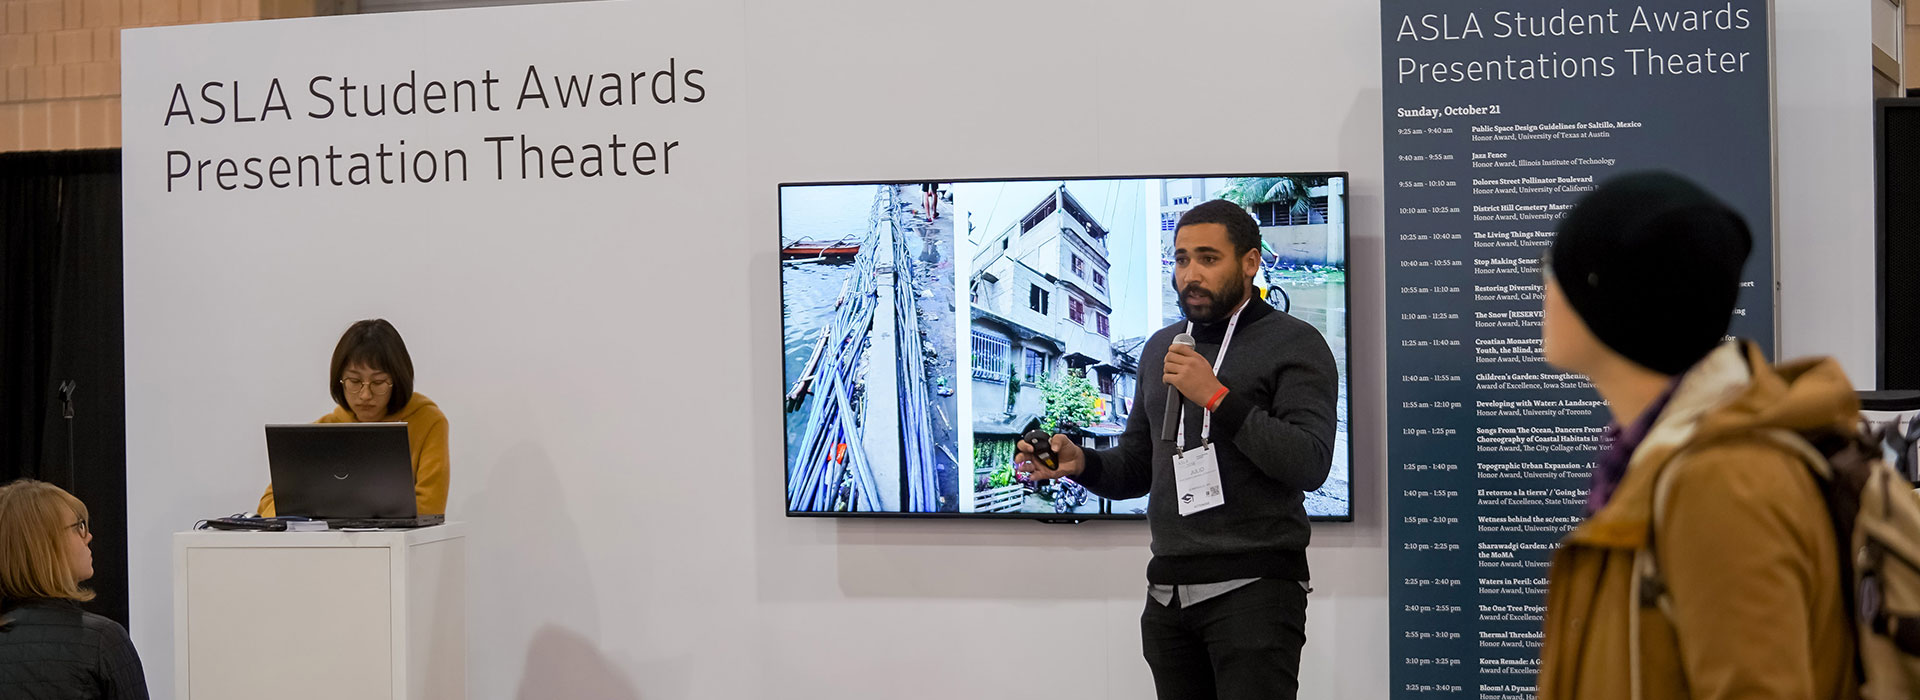 Julio Torres Santana speaks at the American Society of Landscape Architects Awards Program, where he and two students from the Harvard University Graduate School of Design received an Award of Excellence in the Residential Design Category.